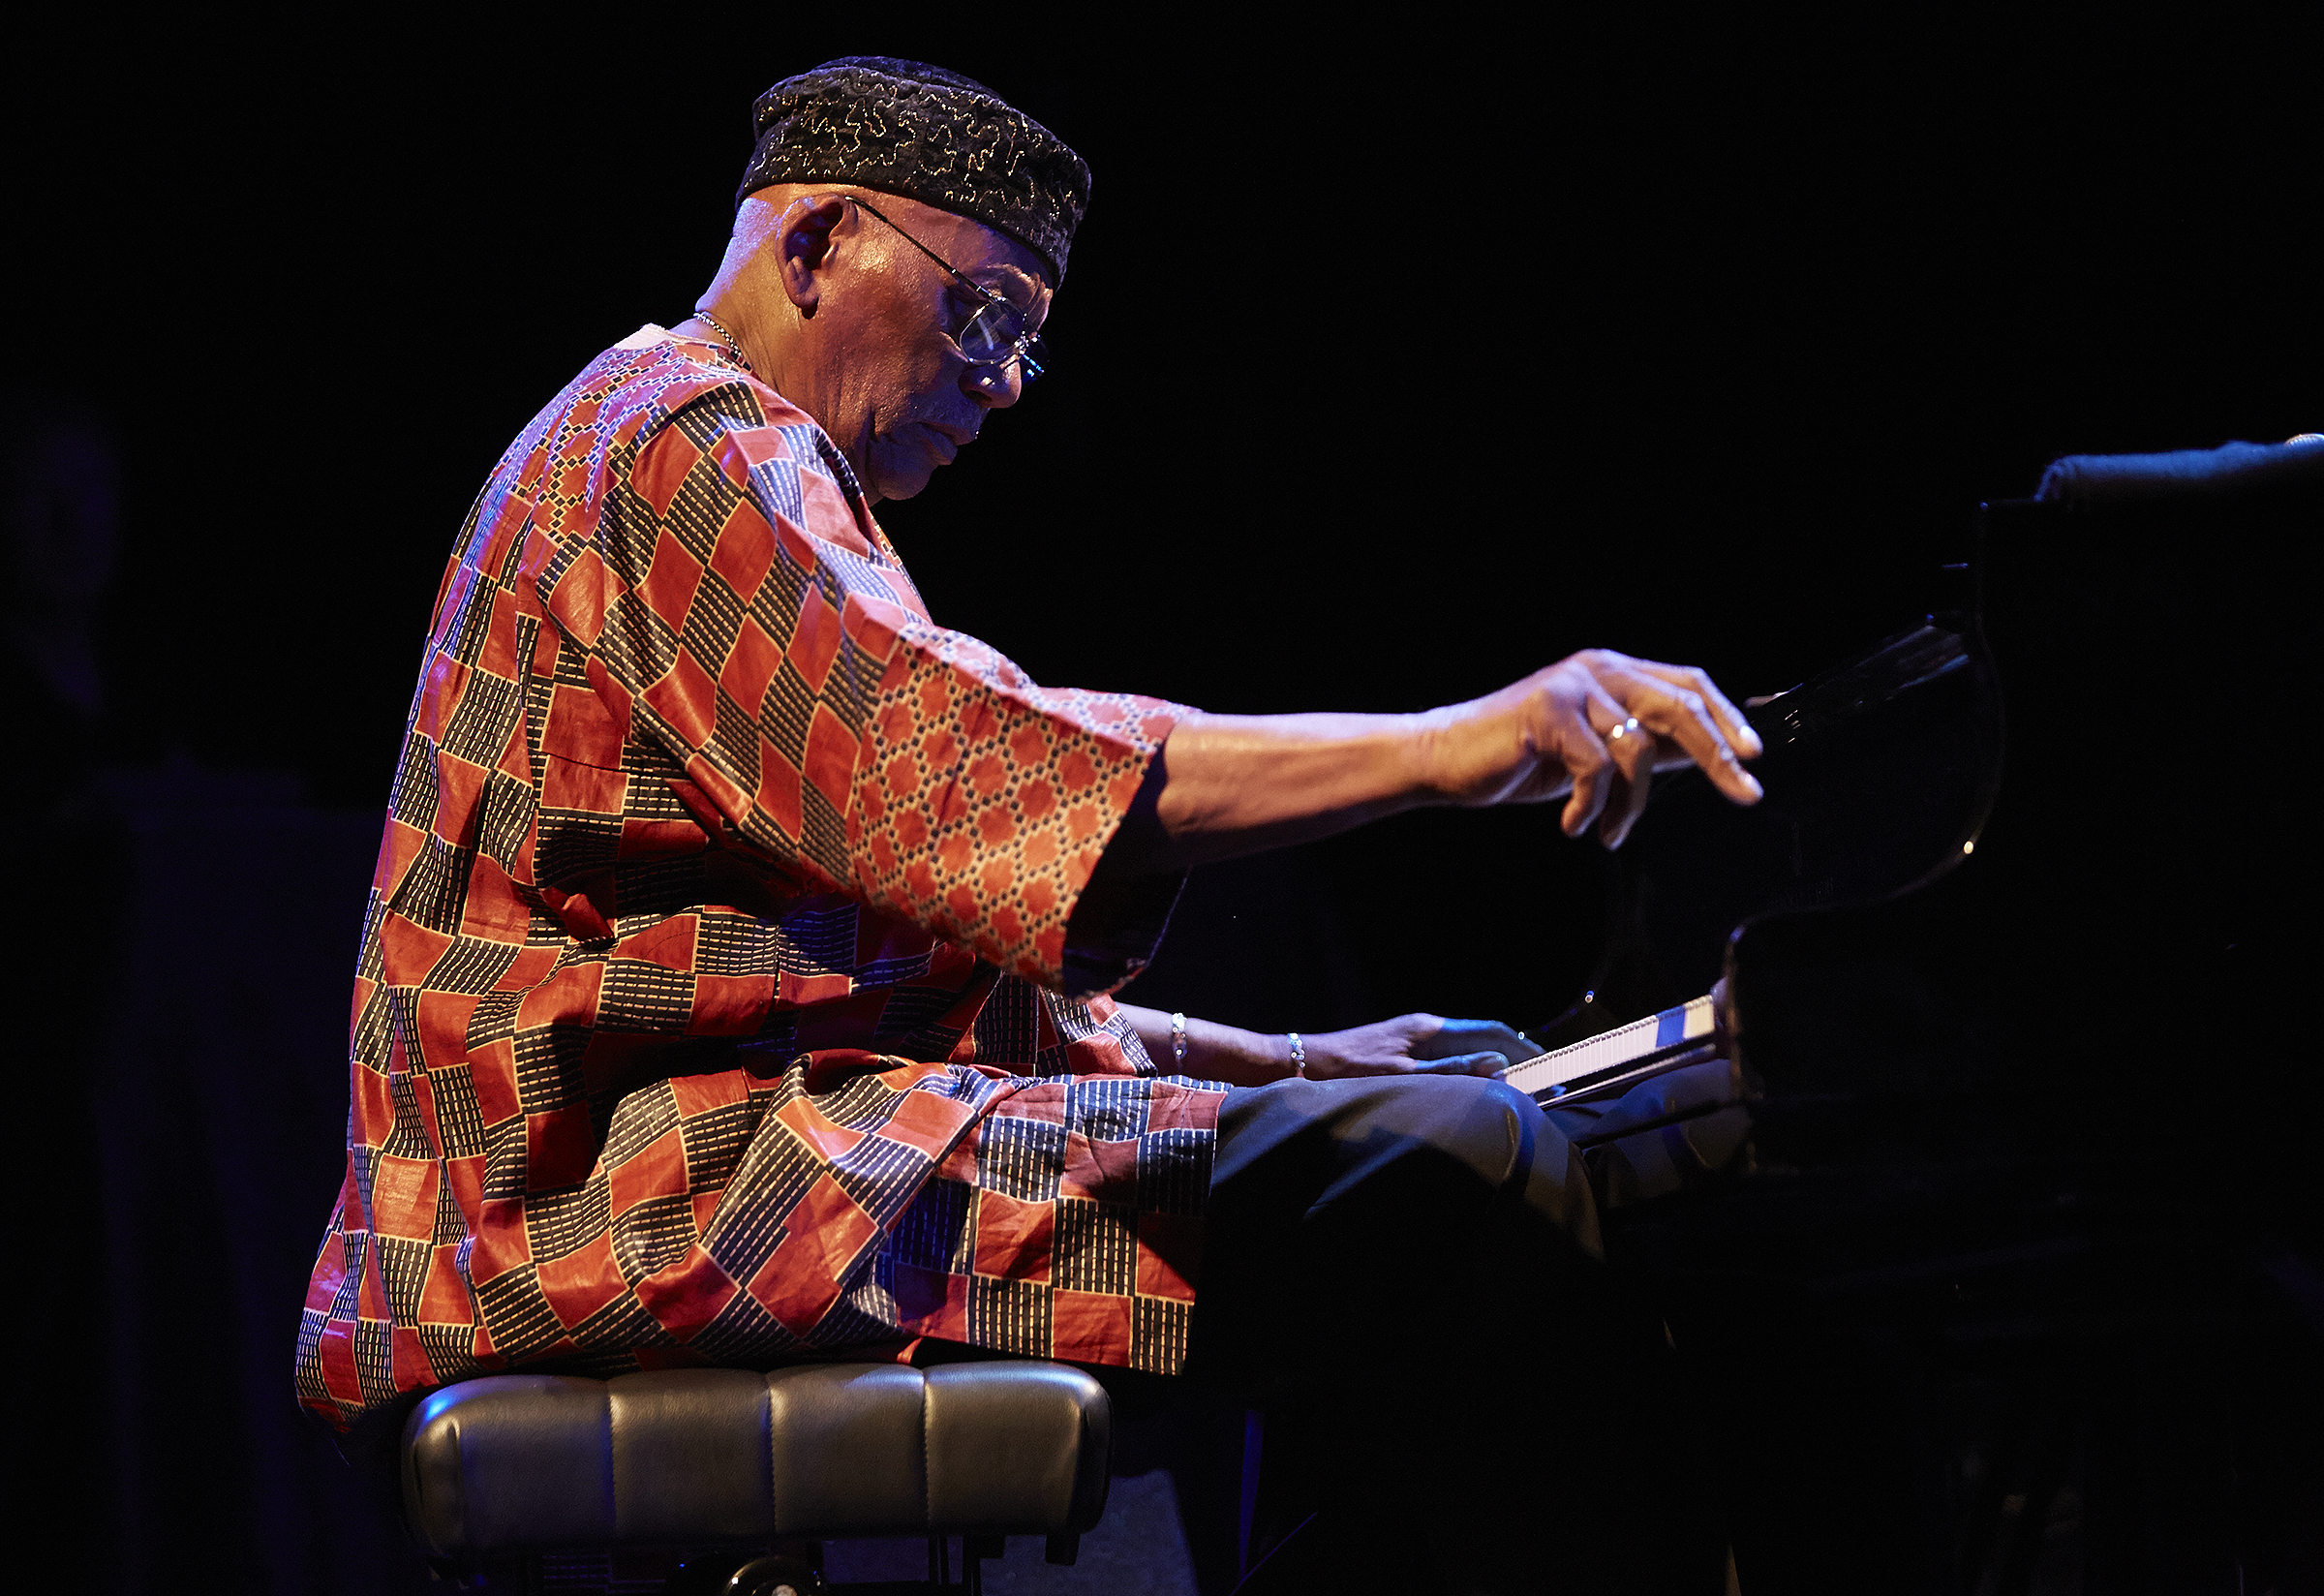 Randy Weston obituary – 'A towering figure in jazz and world music 